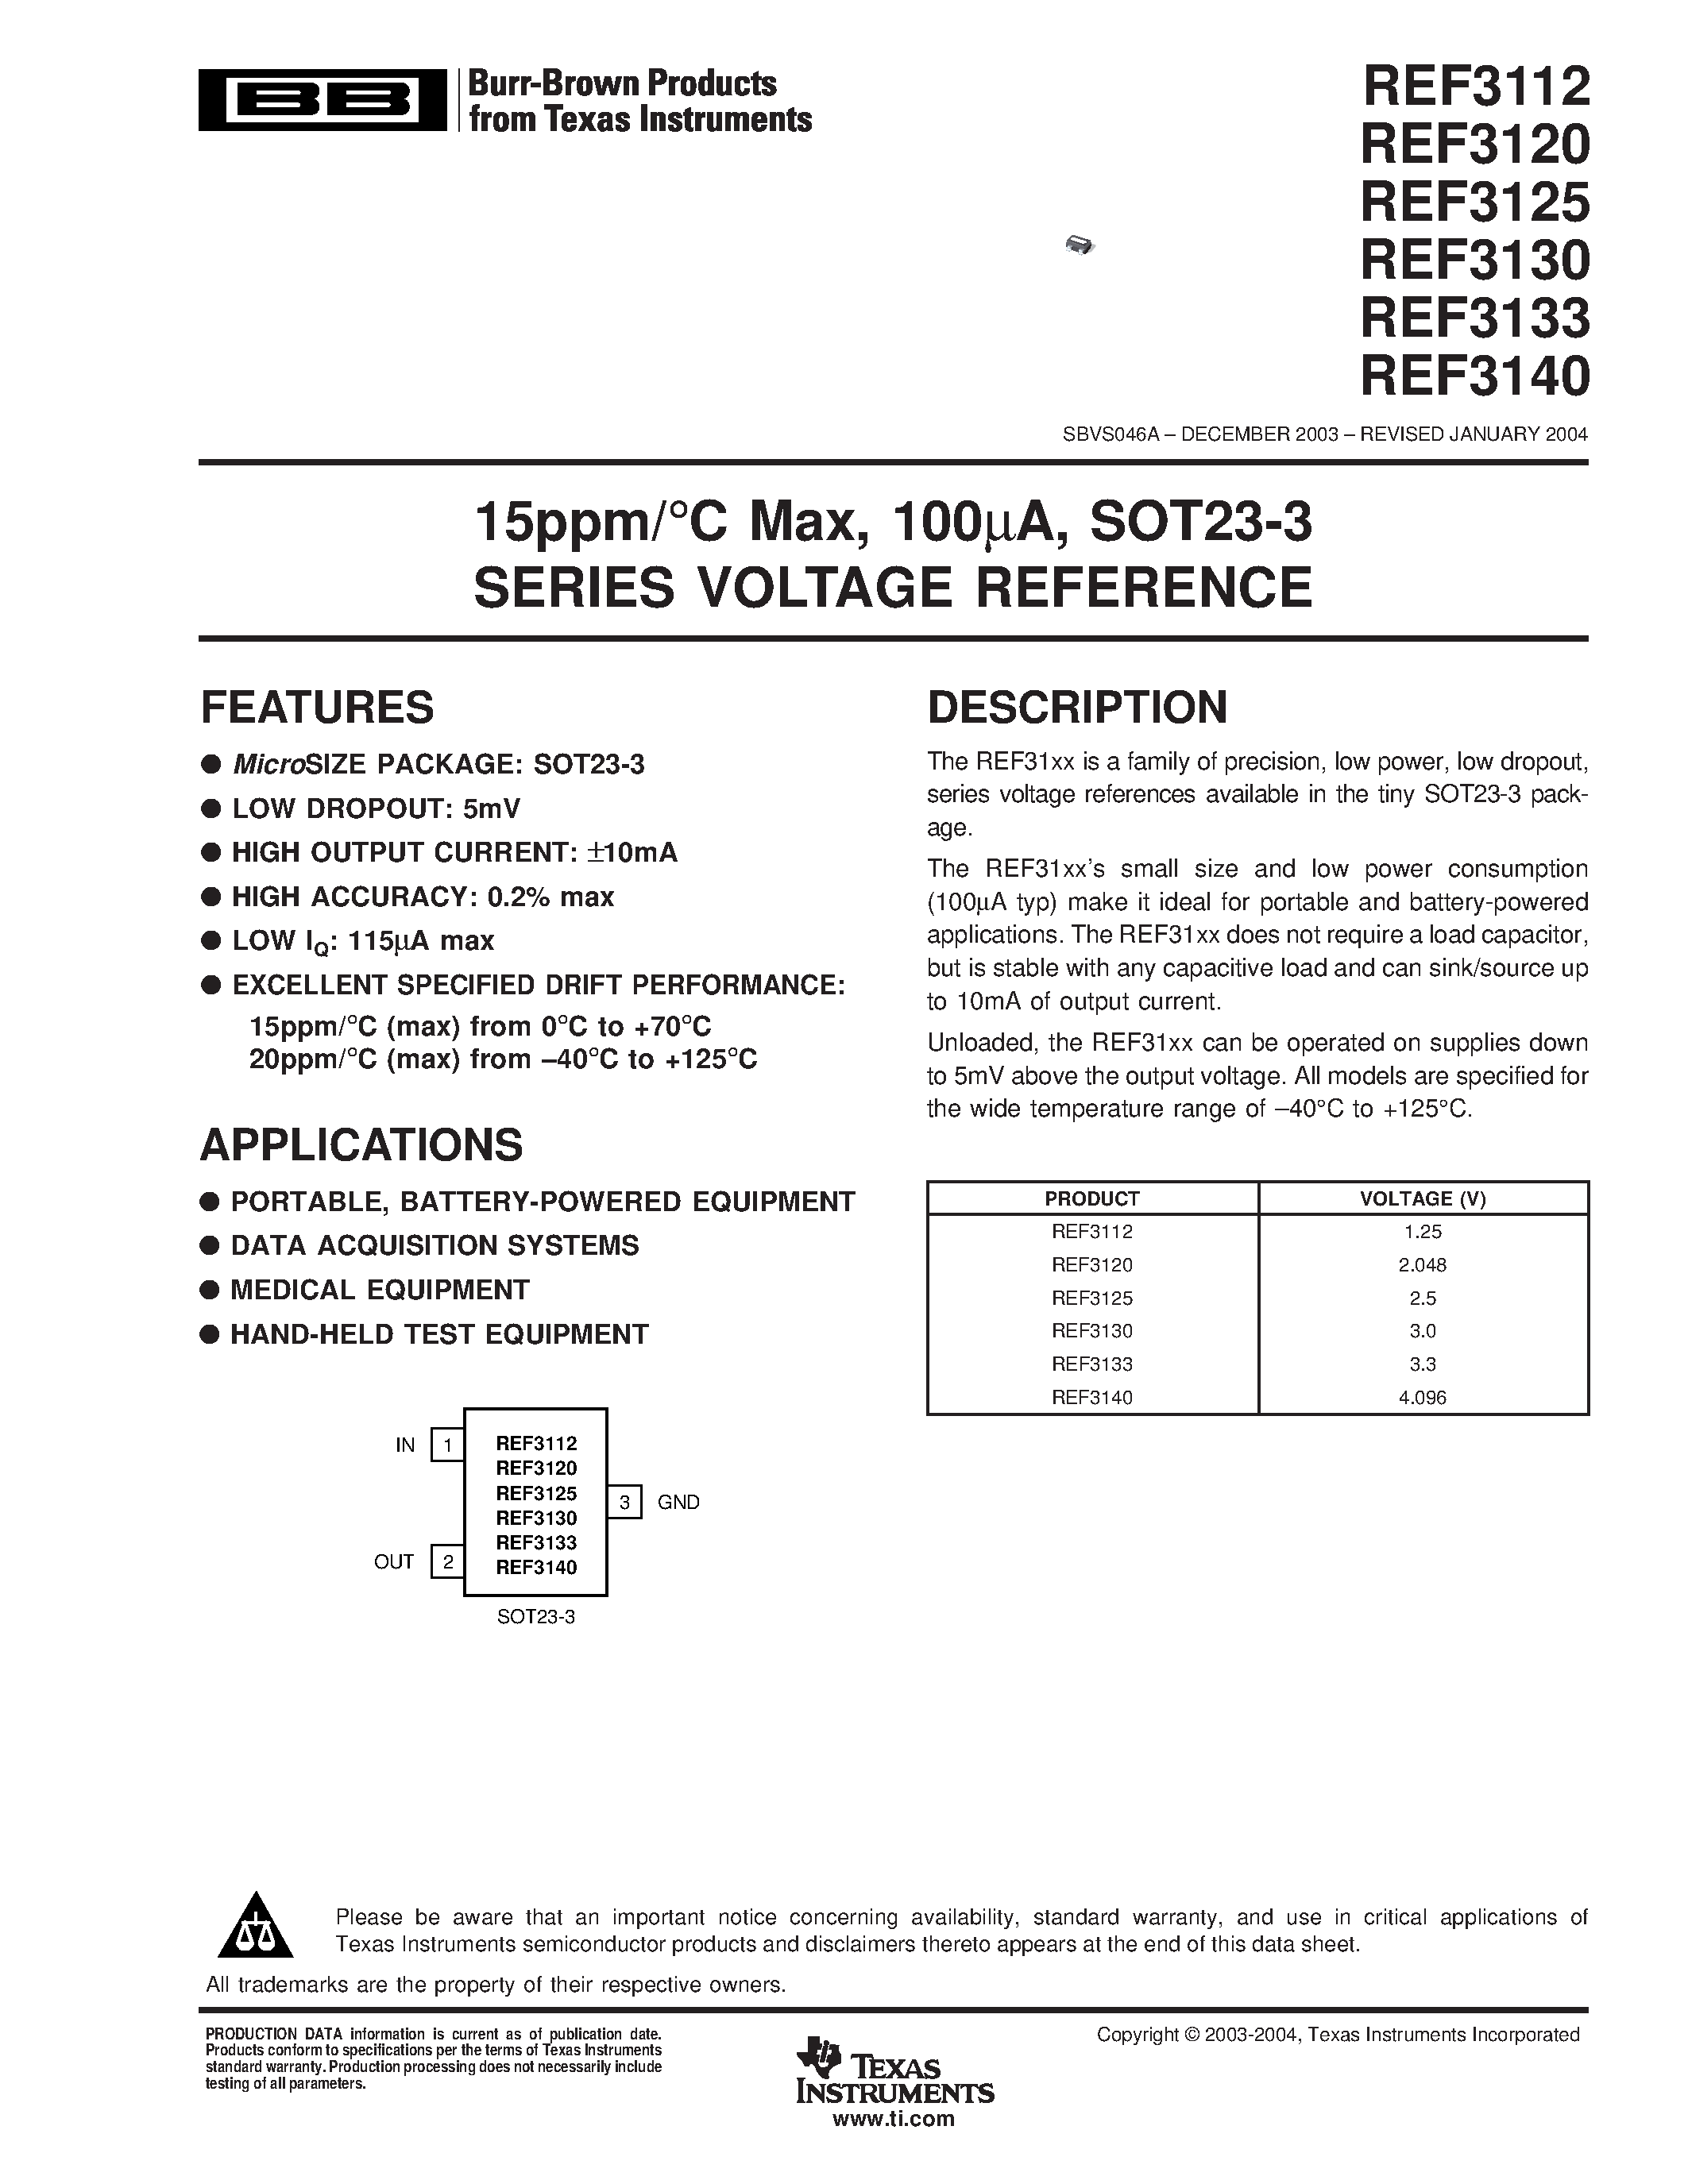 Datasheet REF3140AIDBZT - 15ppm/C Max/ 100UA/ SOT23-3 SERIES VOLTAGE REFERENCE page 1